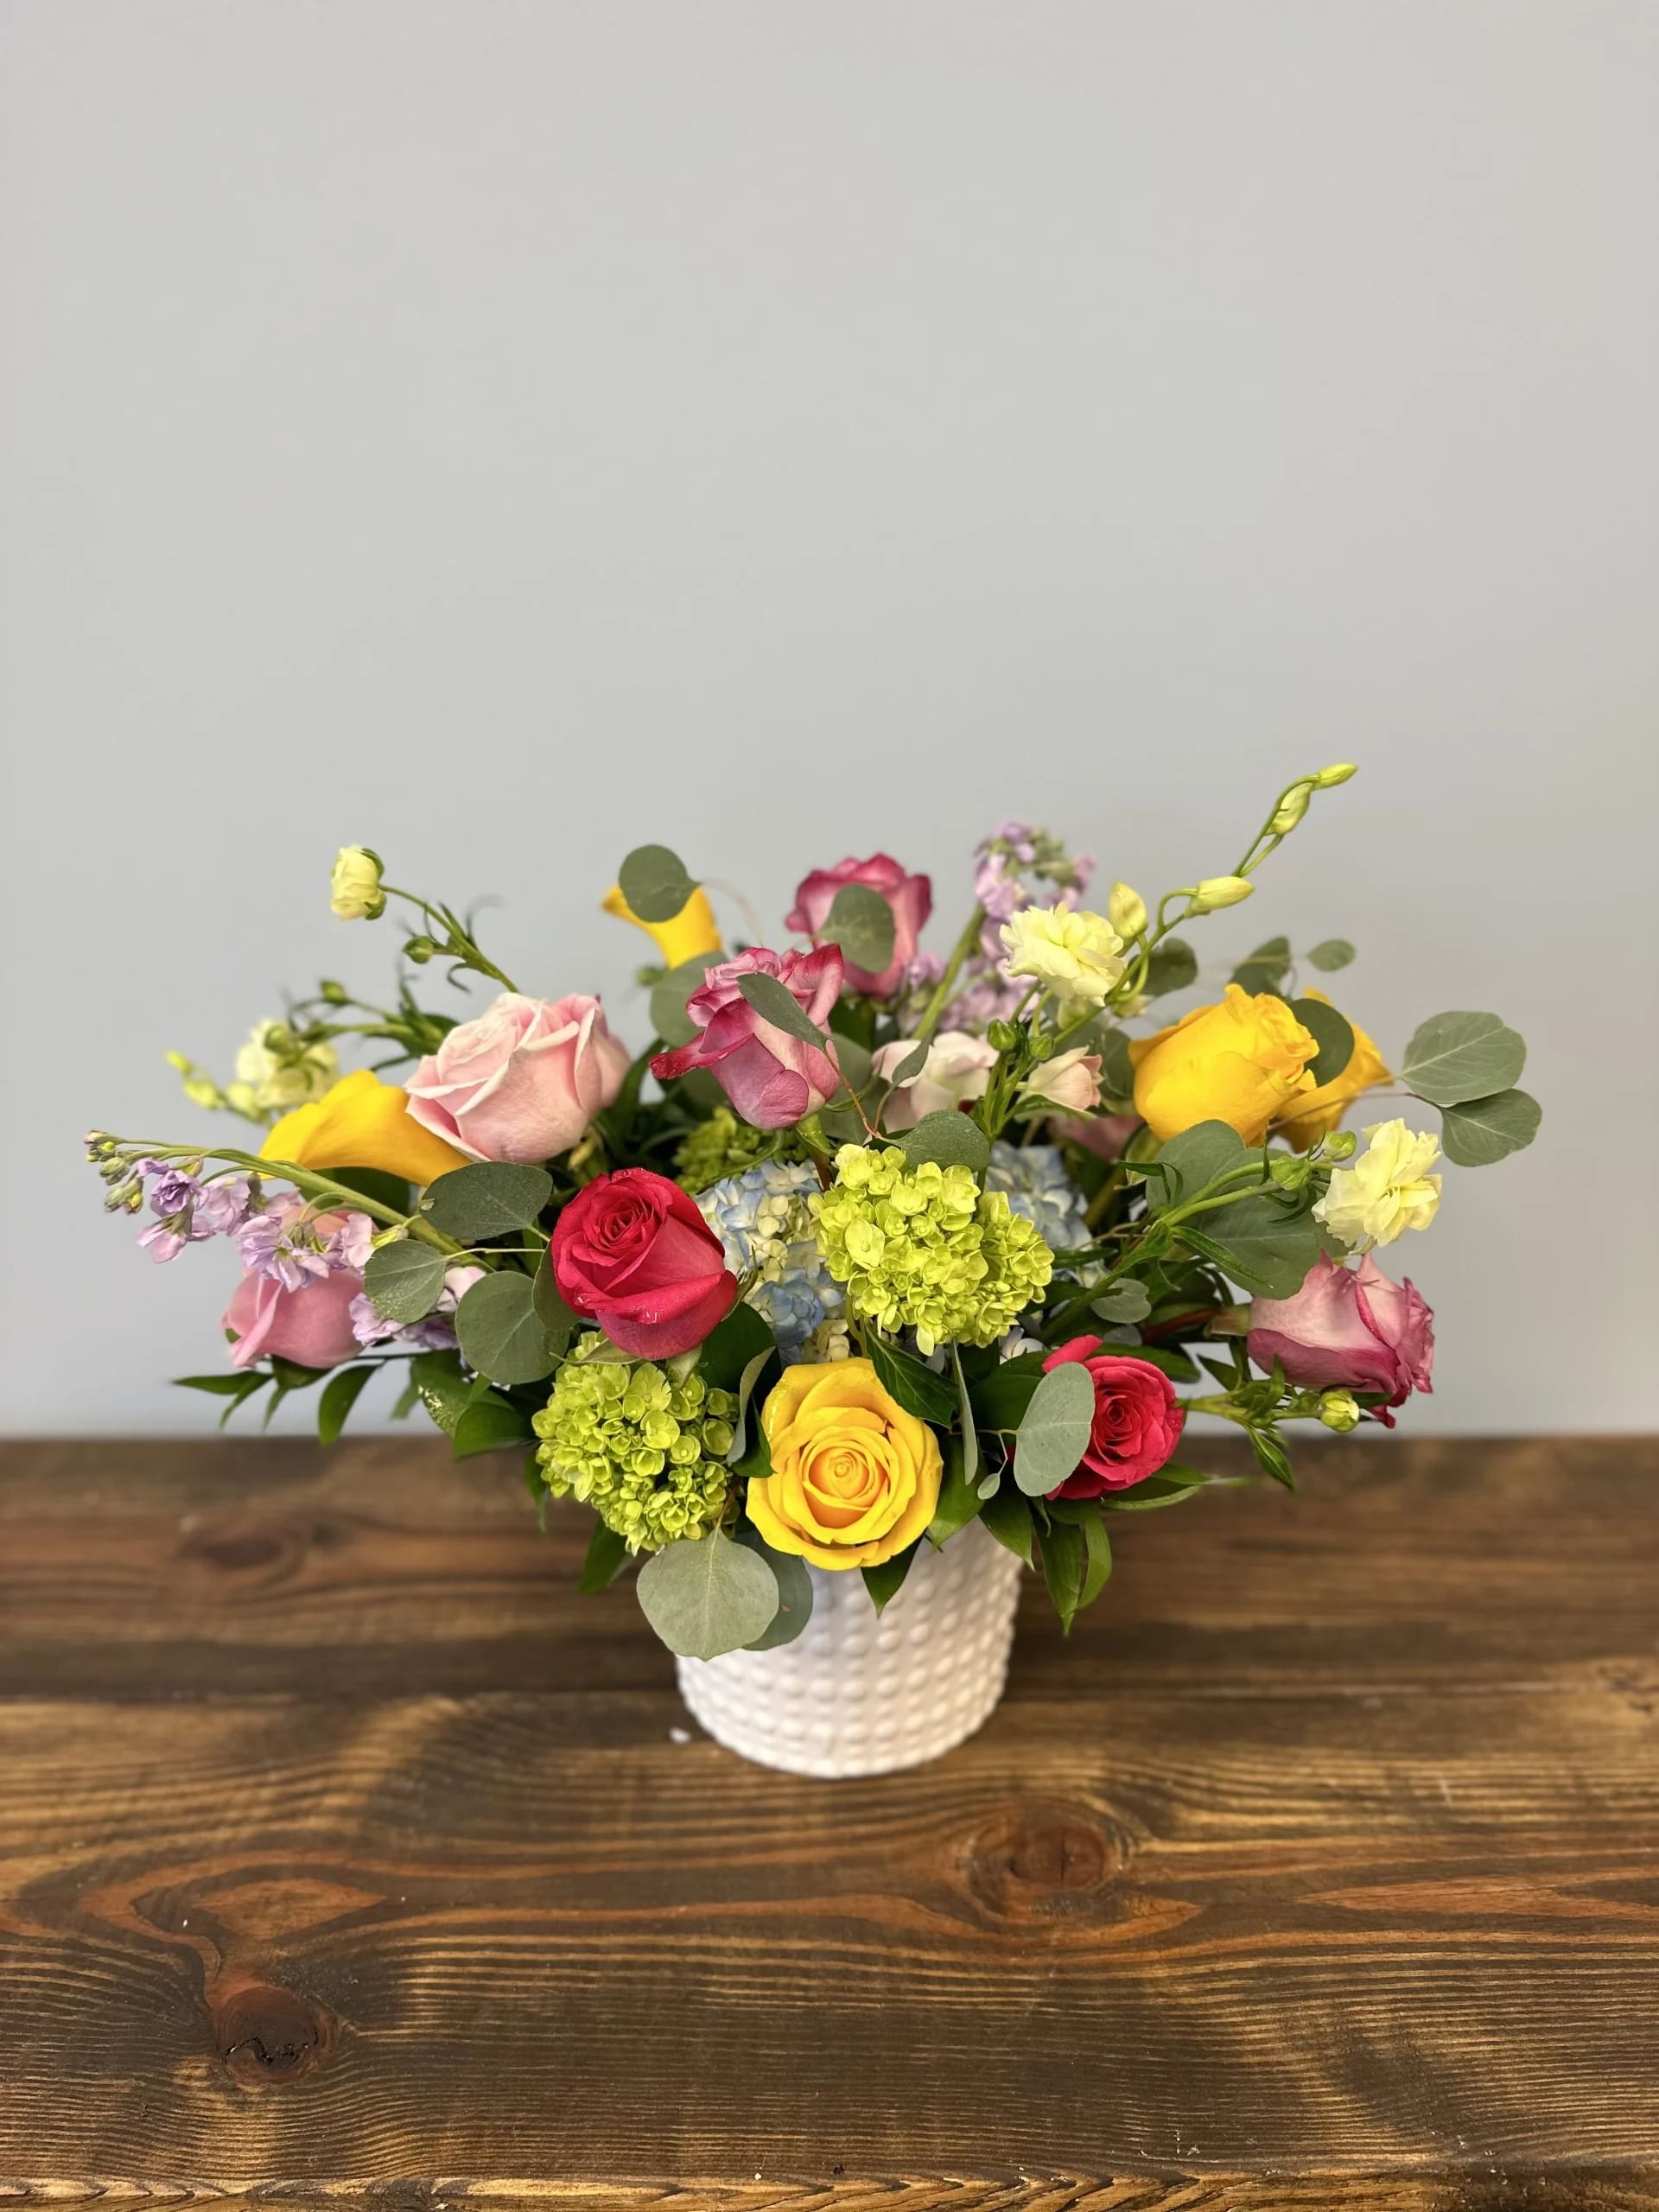 Ellie - Beautiful spring mix full of all the colors: pink yellow, blue, green, purple, etc.  Includes roses, hydrangea, and so much more. A spring mix anyone would love!